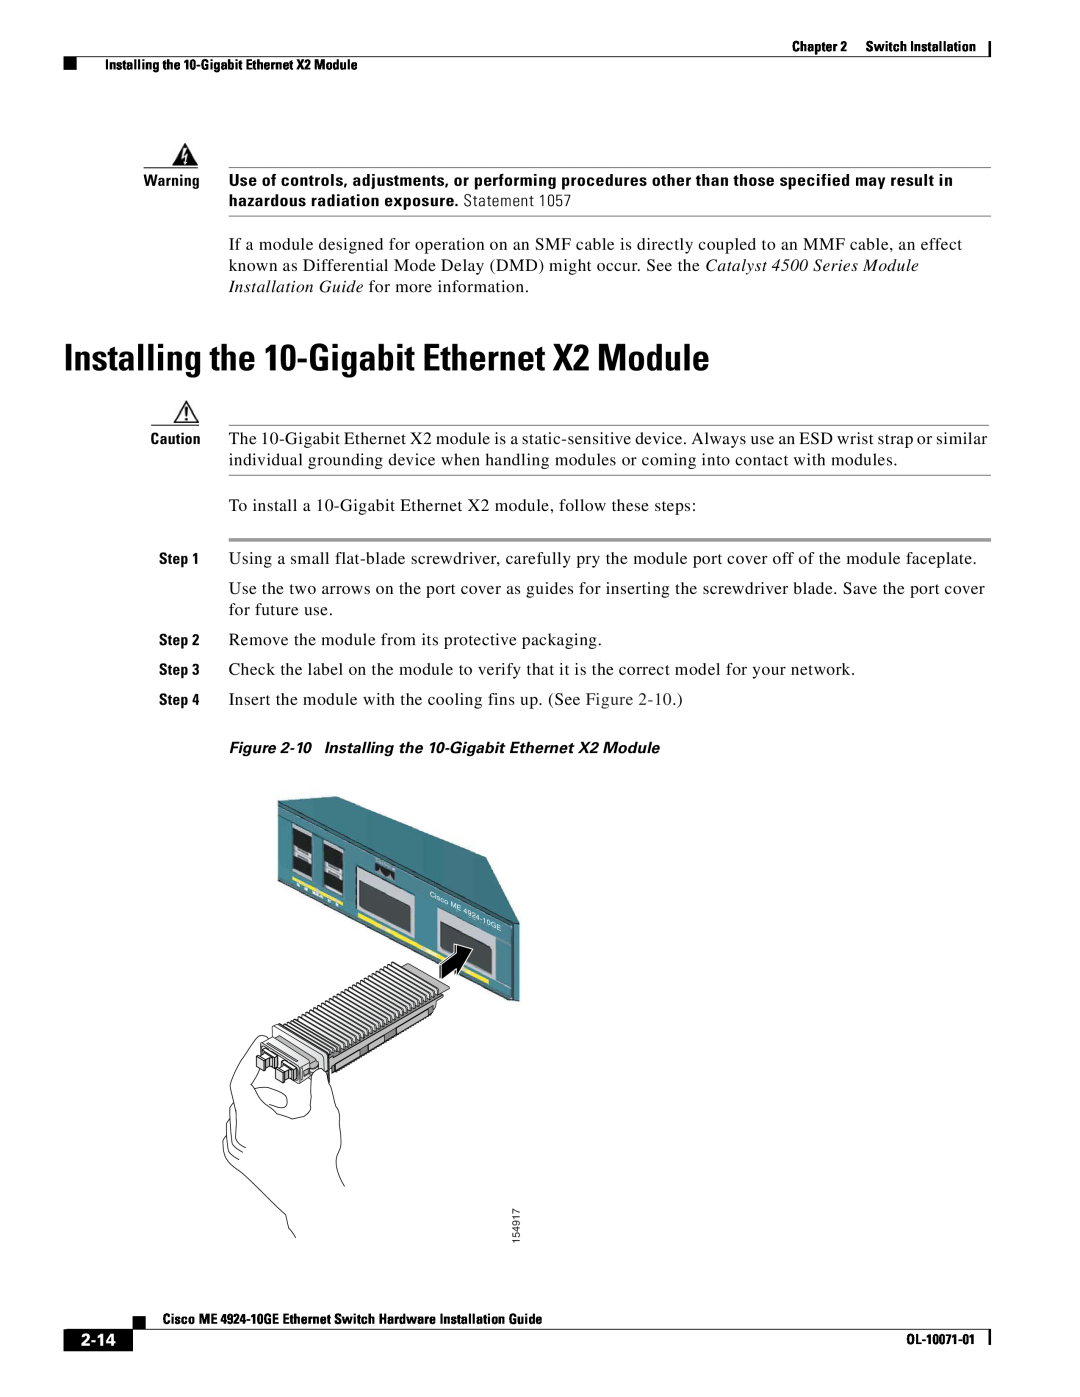 Cisco Systems ME 4924-10GE manual Installing the 10-Gigabit Ethernet X2 Module, 2-14 